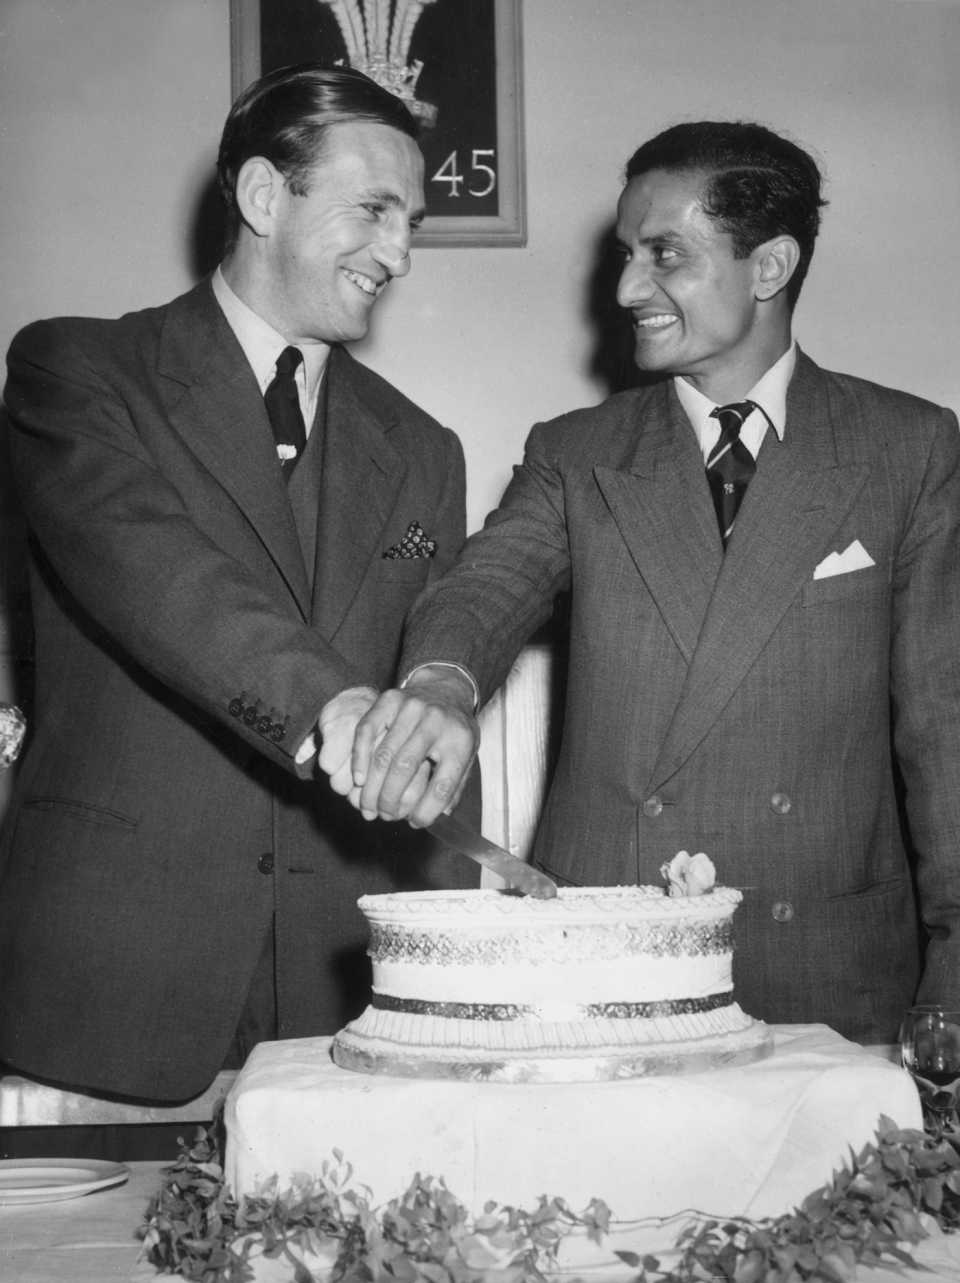 Len Hutton and Vijay Hazare cut a cake during a party at the Oval